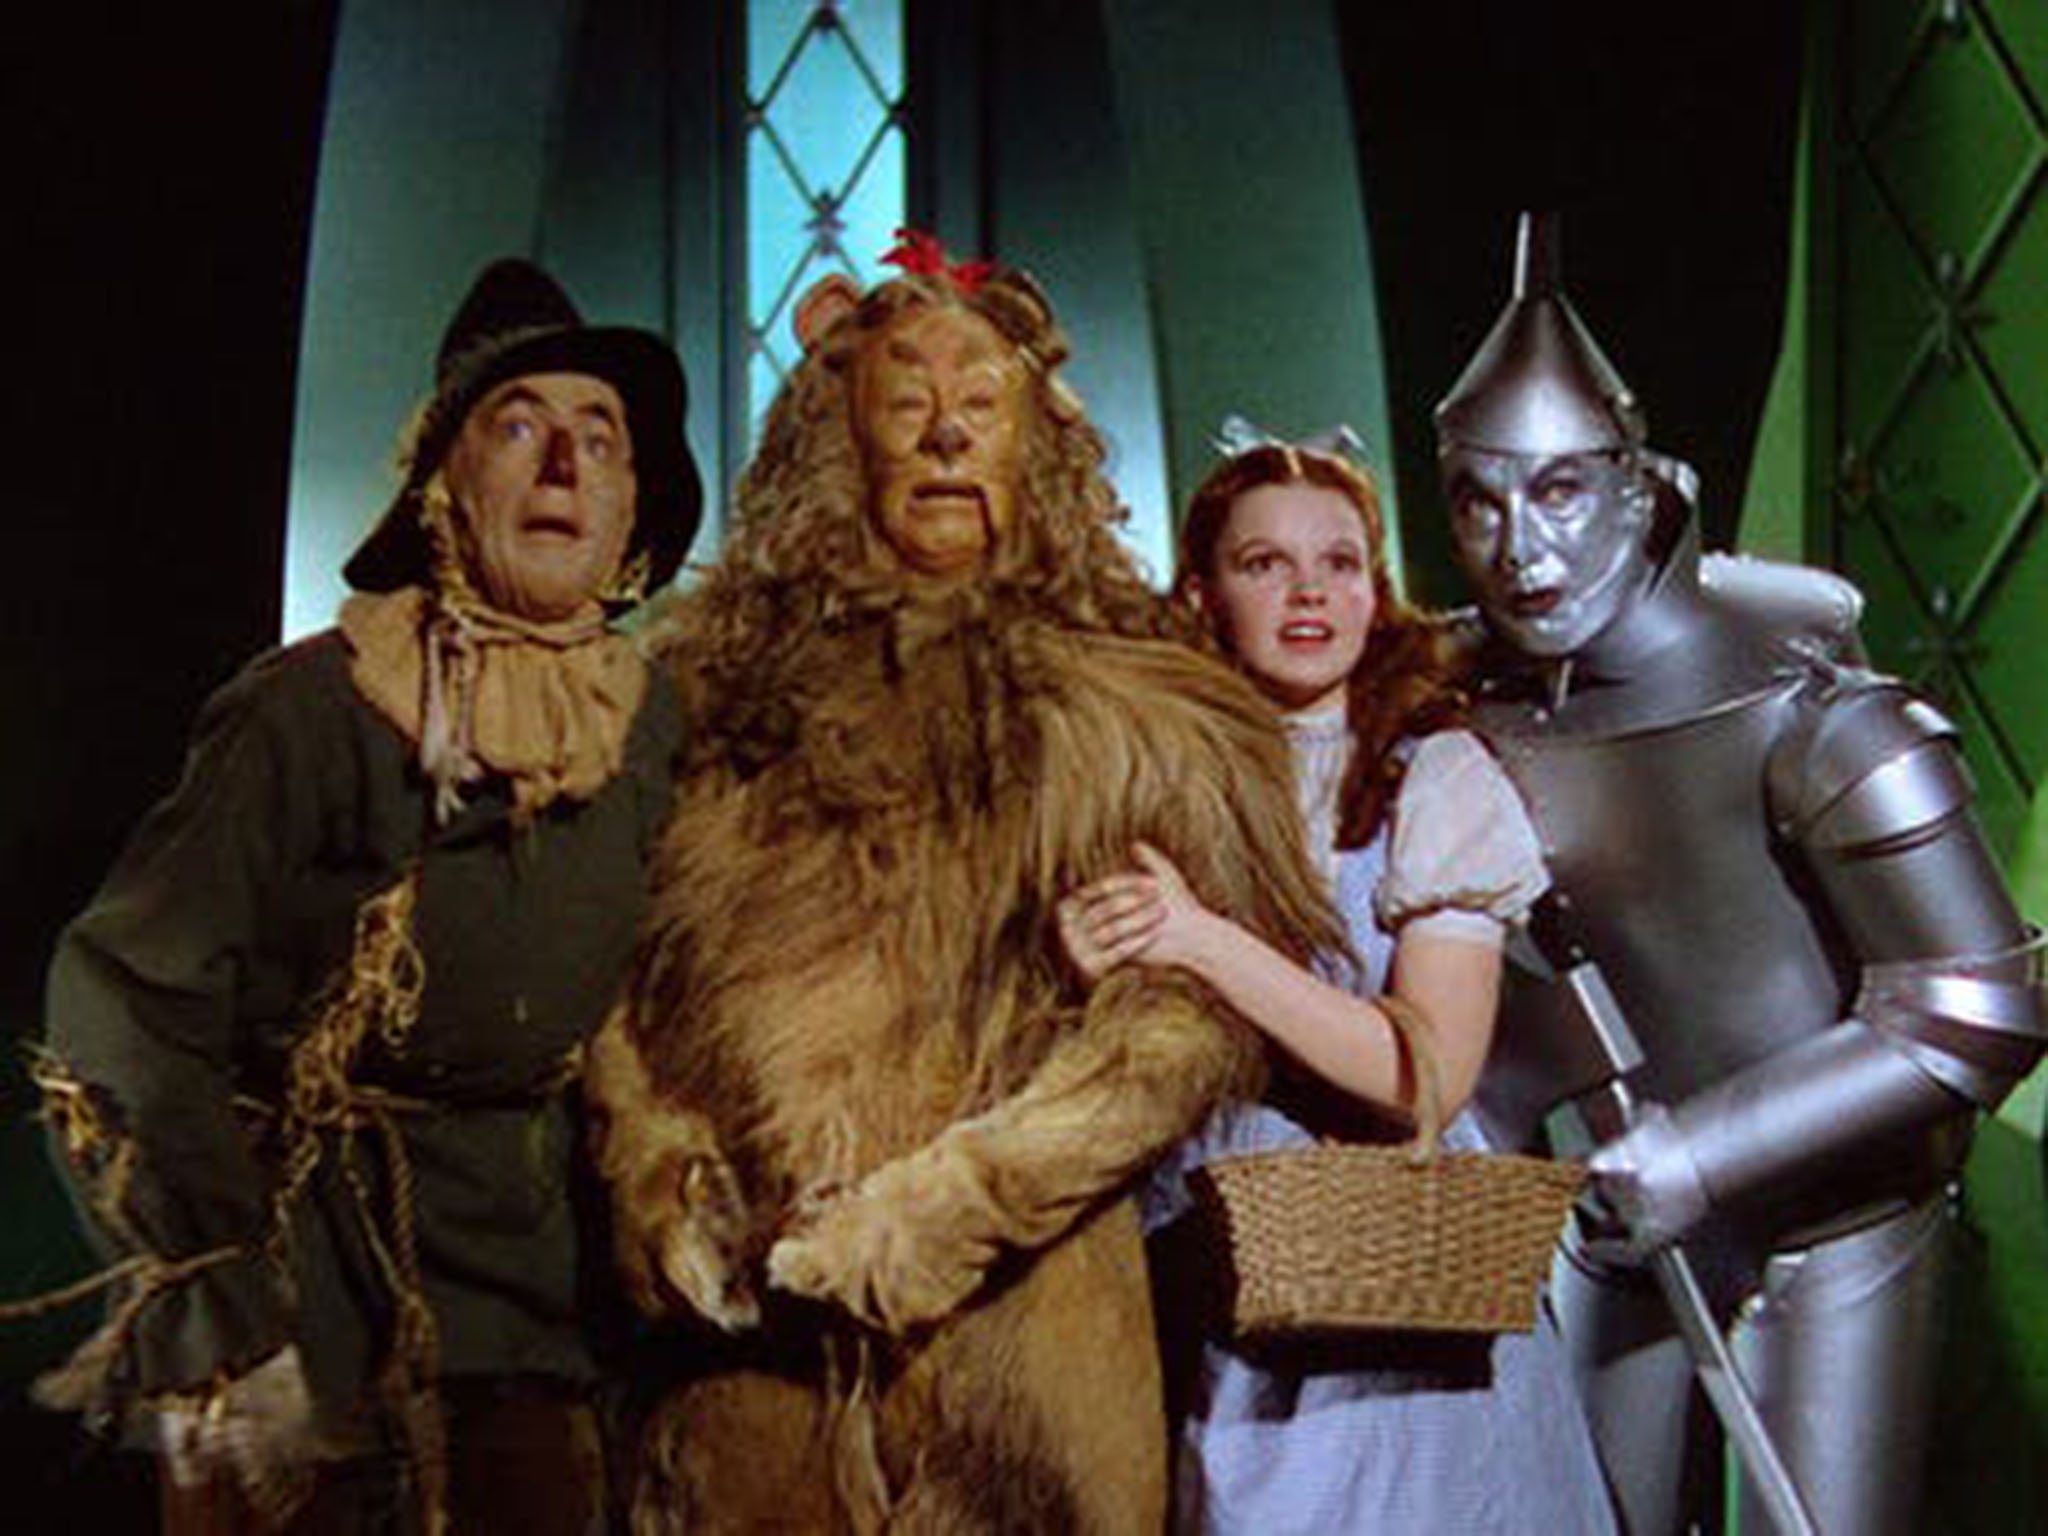 Friends of Dorothy: filmmakers view ‘The Wizard of Oz’ as the art form that comes closest to our dreams